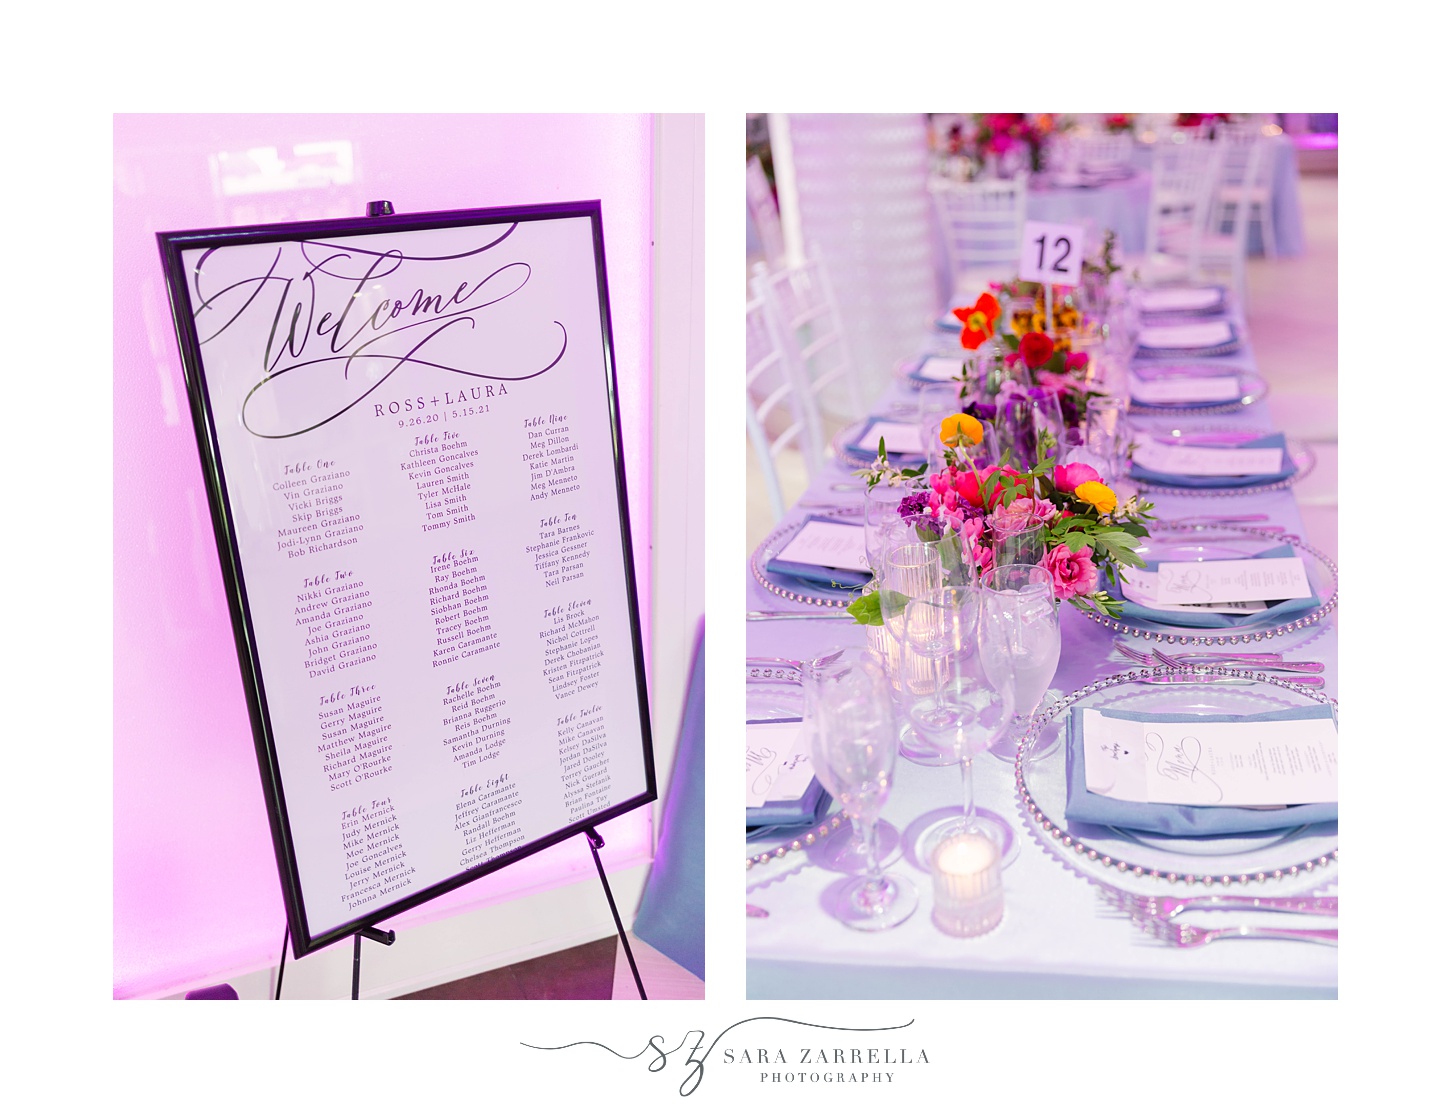 searching chart and table settings for RI wedding reception 